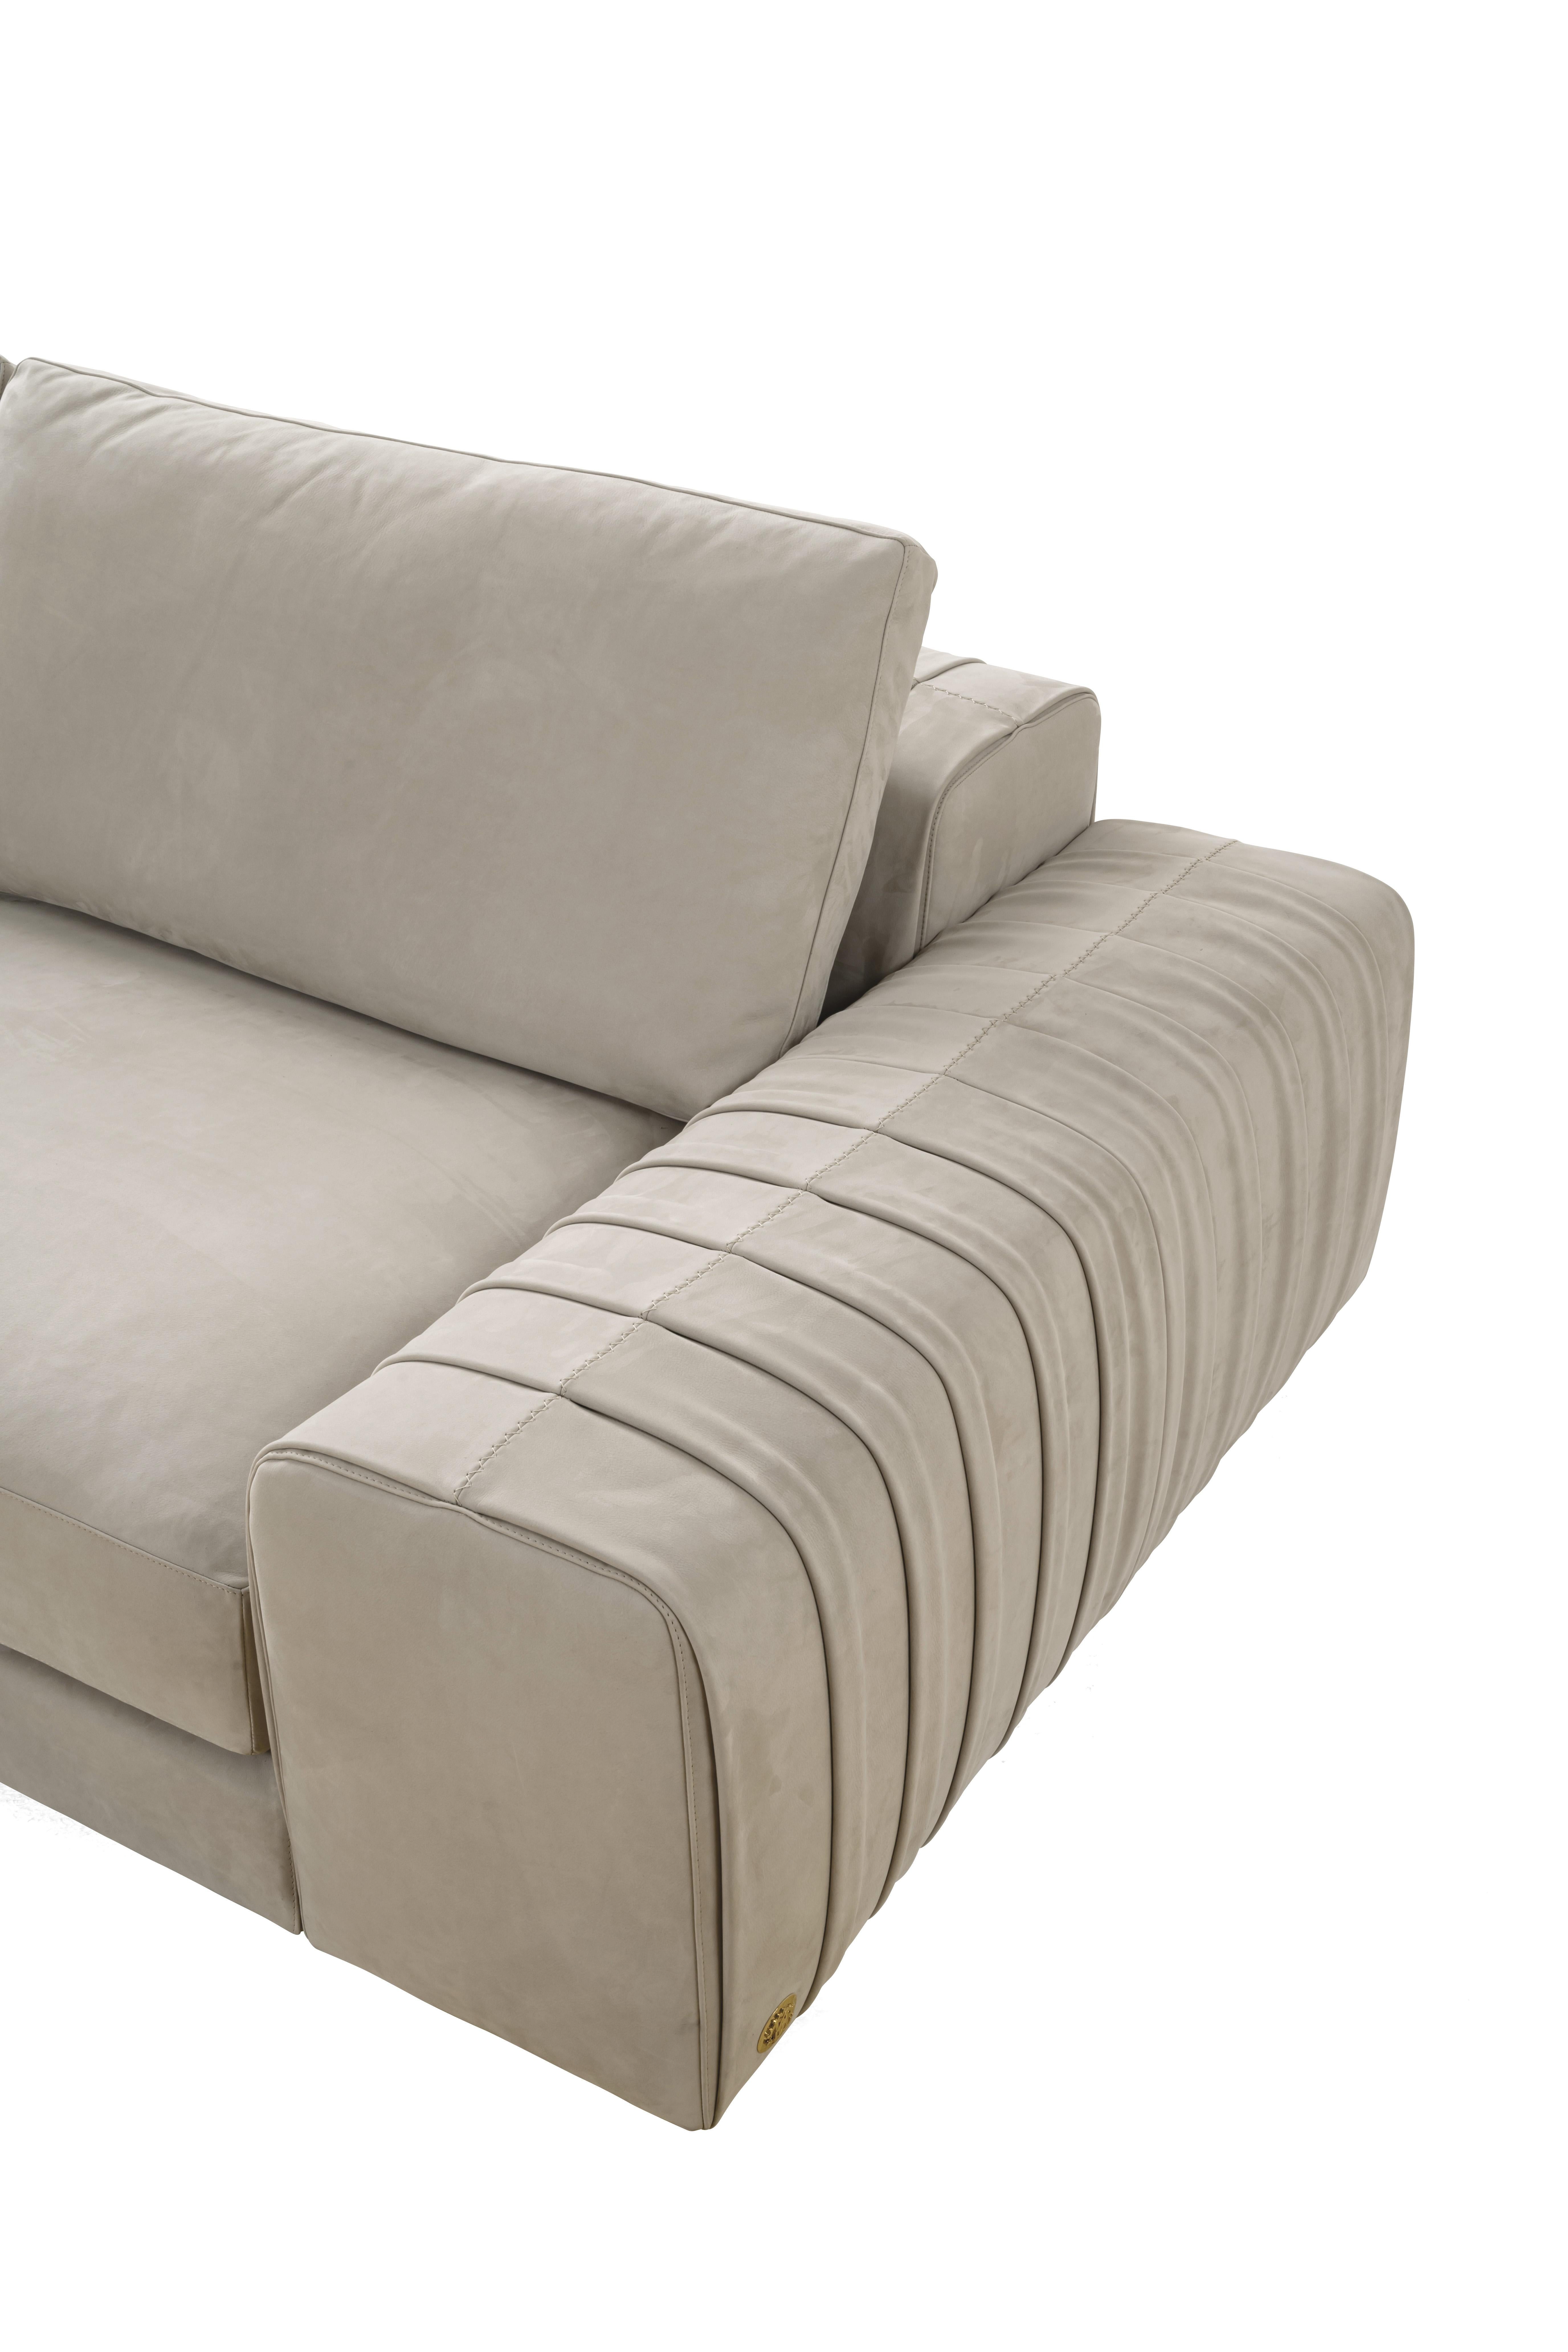 Modern 21st Century Kingston Sofa in Leather by Roberto Cavalli Home Interiors For Sale